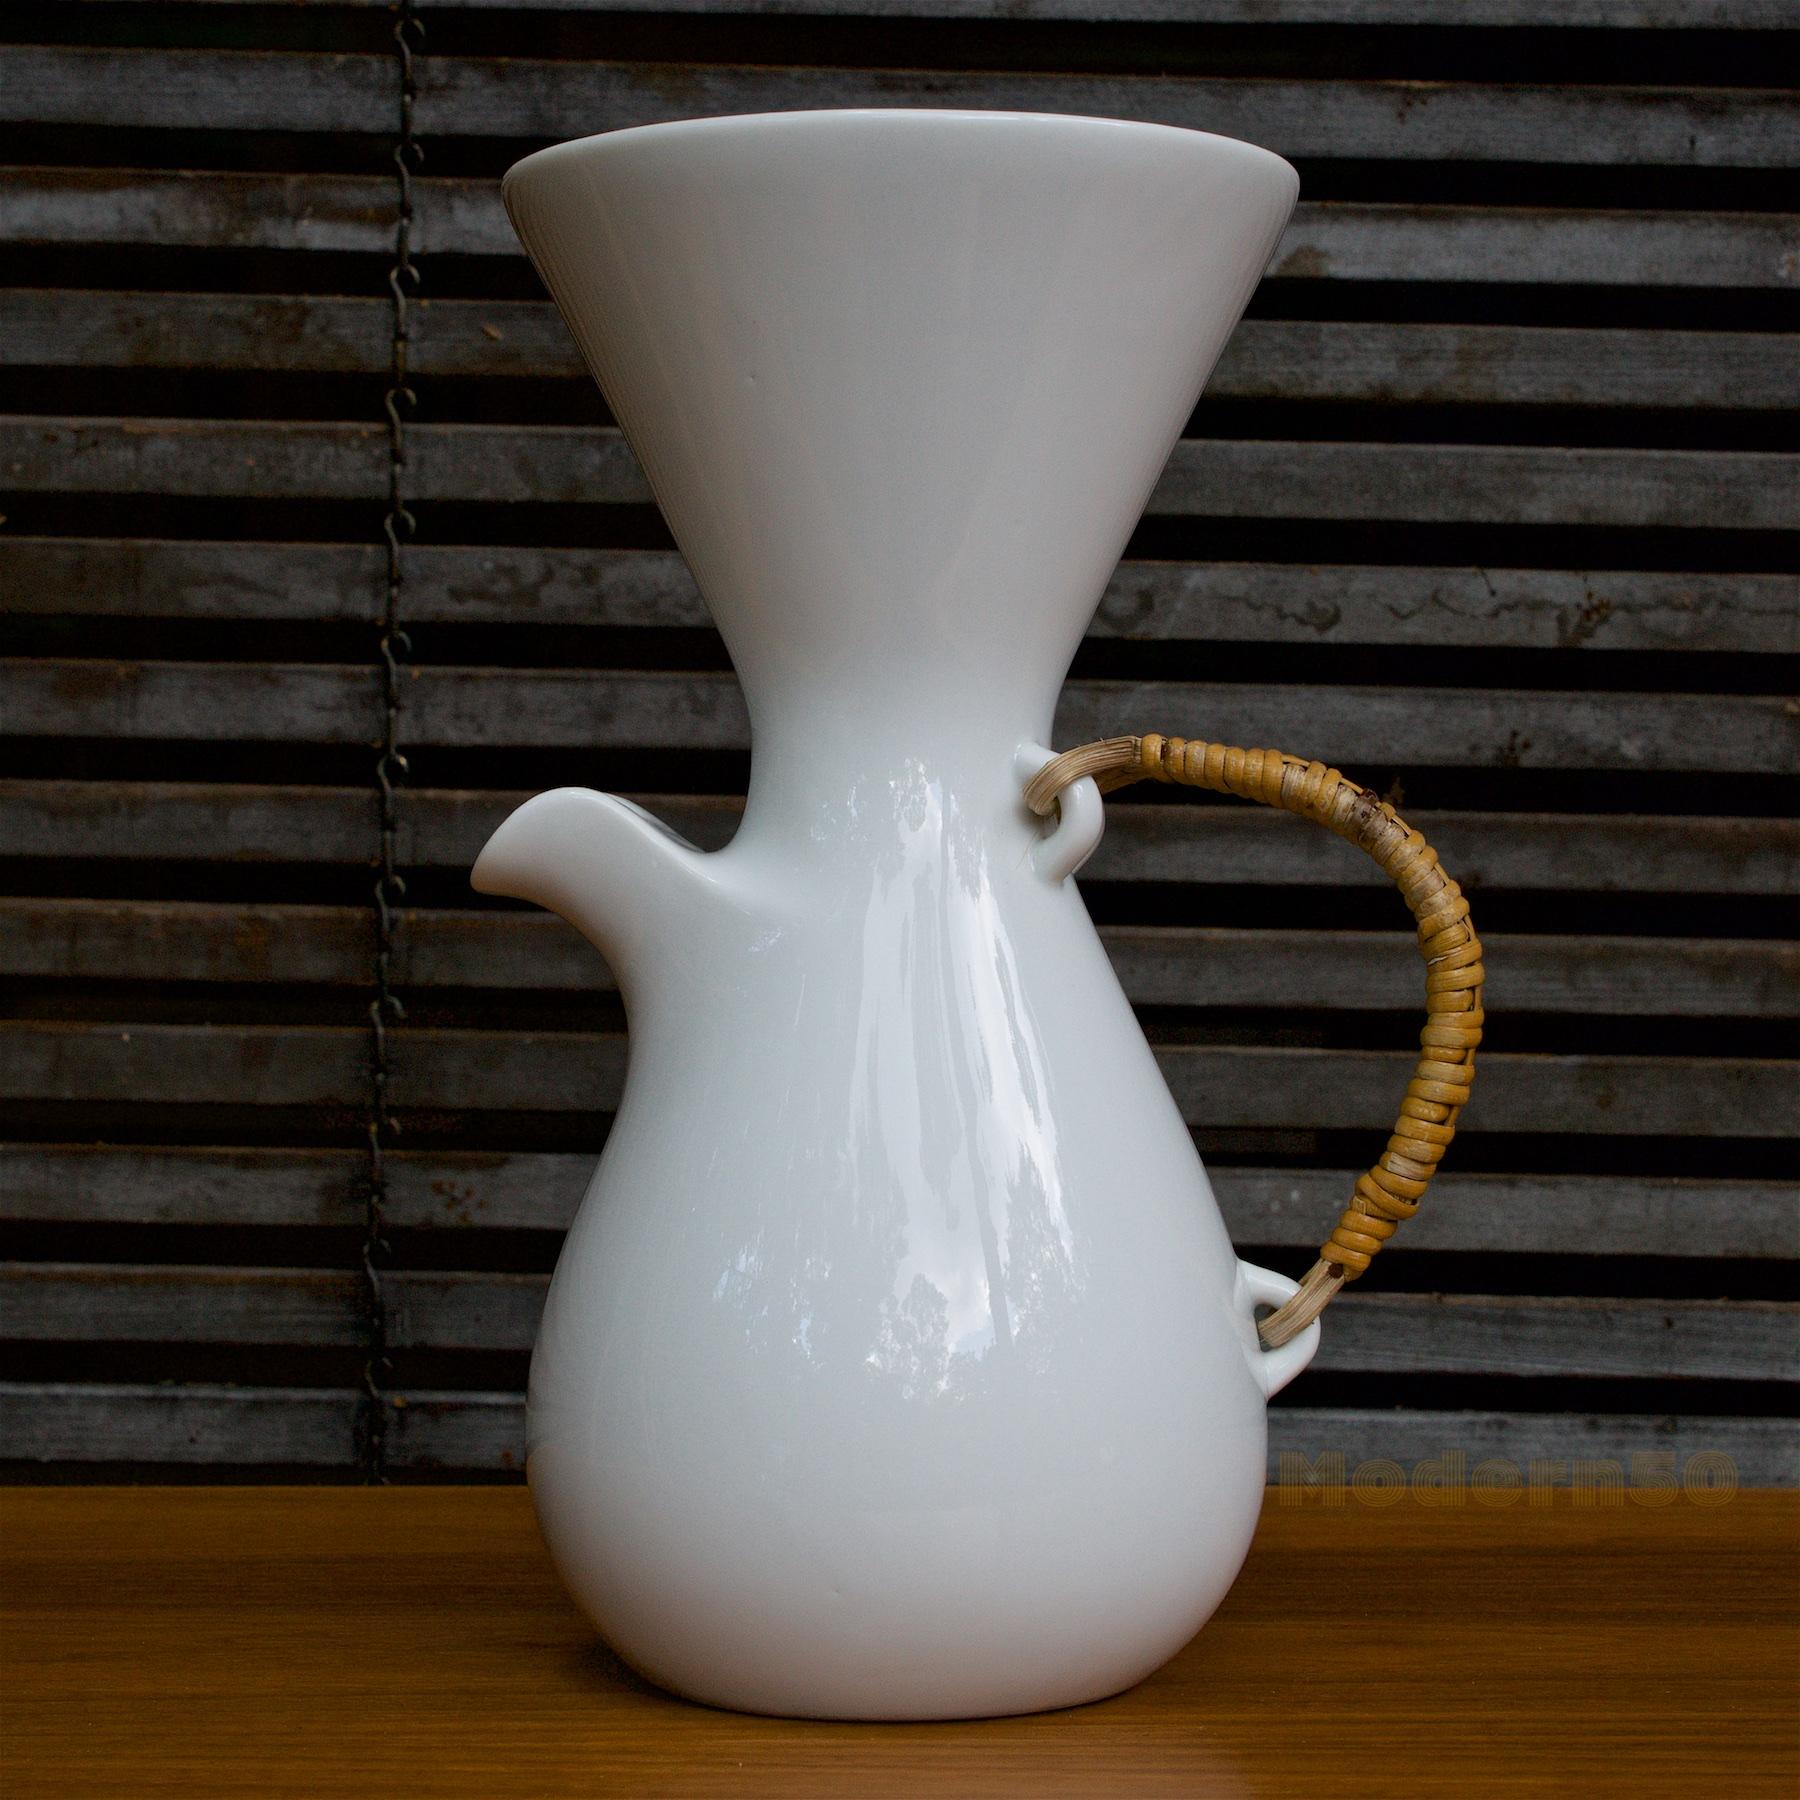 Wonderful white porcelain hourglass pitcher, original rattan handle is in good usable condition, porcelain has no chips, and no cracks. Top rim diameter is 5 3/4.